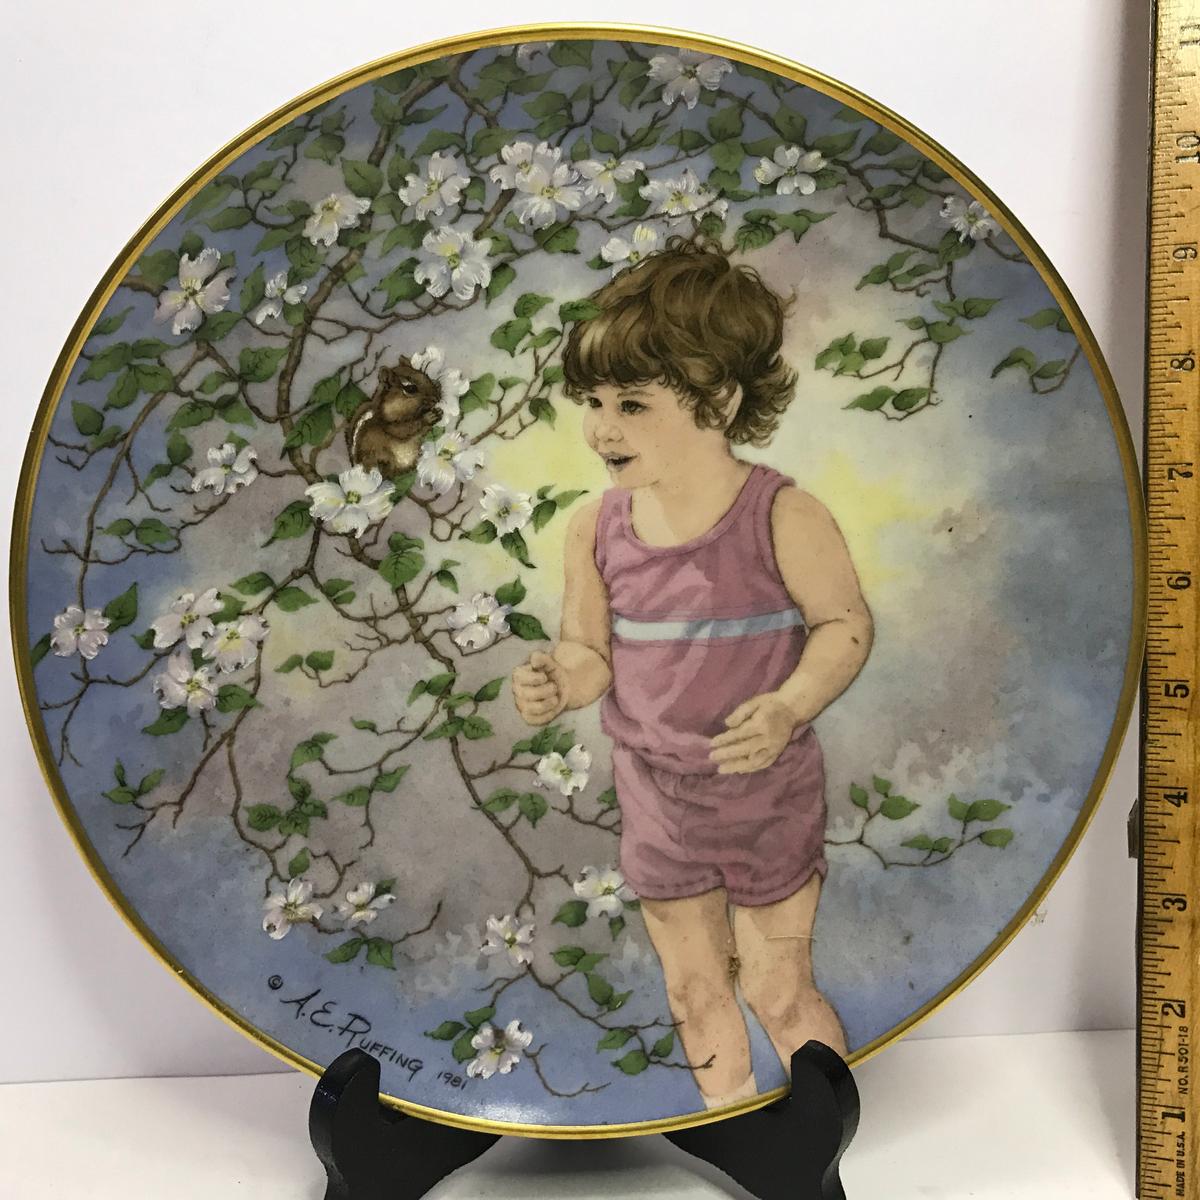 Danbury Mint "Journey of Dreams" by A.E. Ruffing "Pied Piper" Collector's Plate